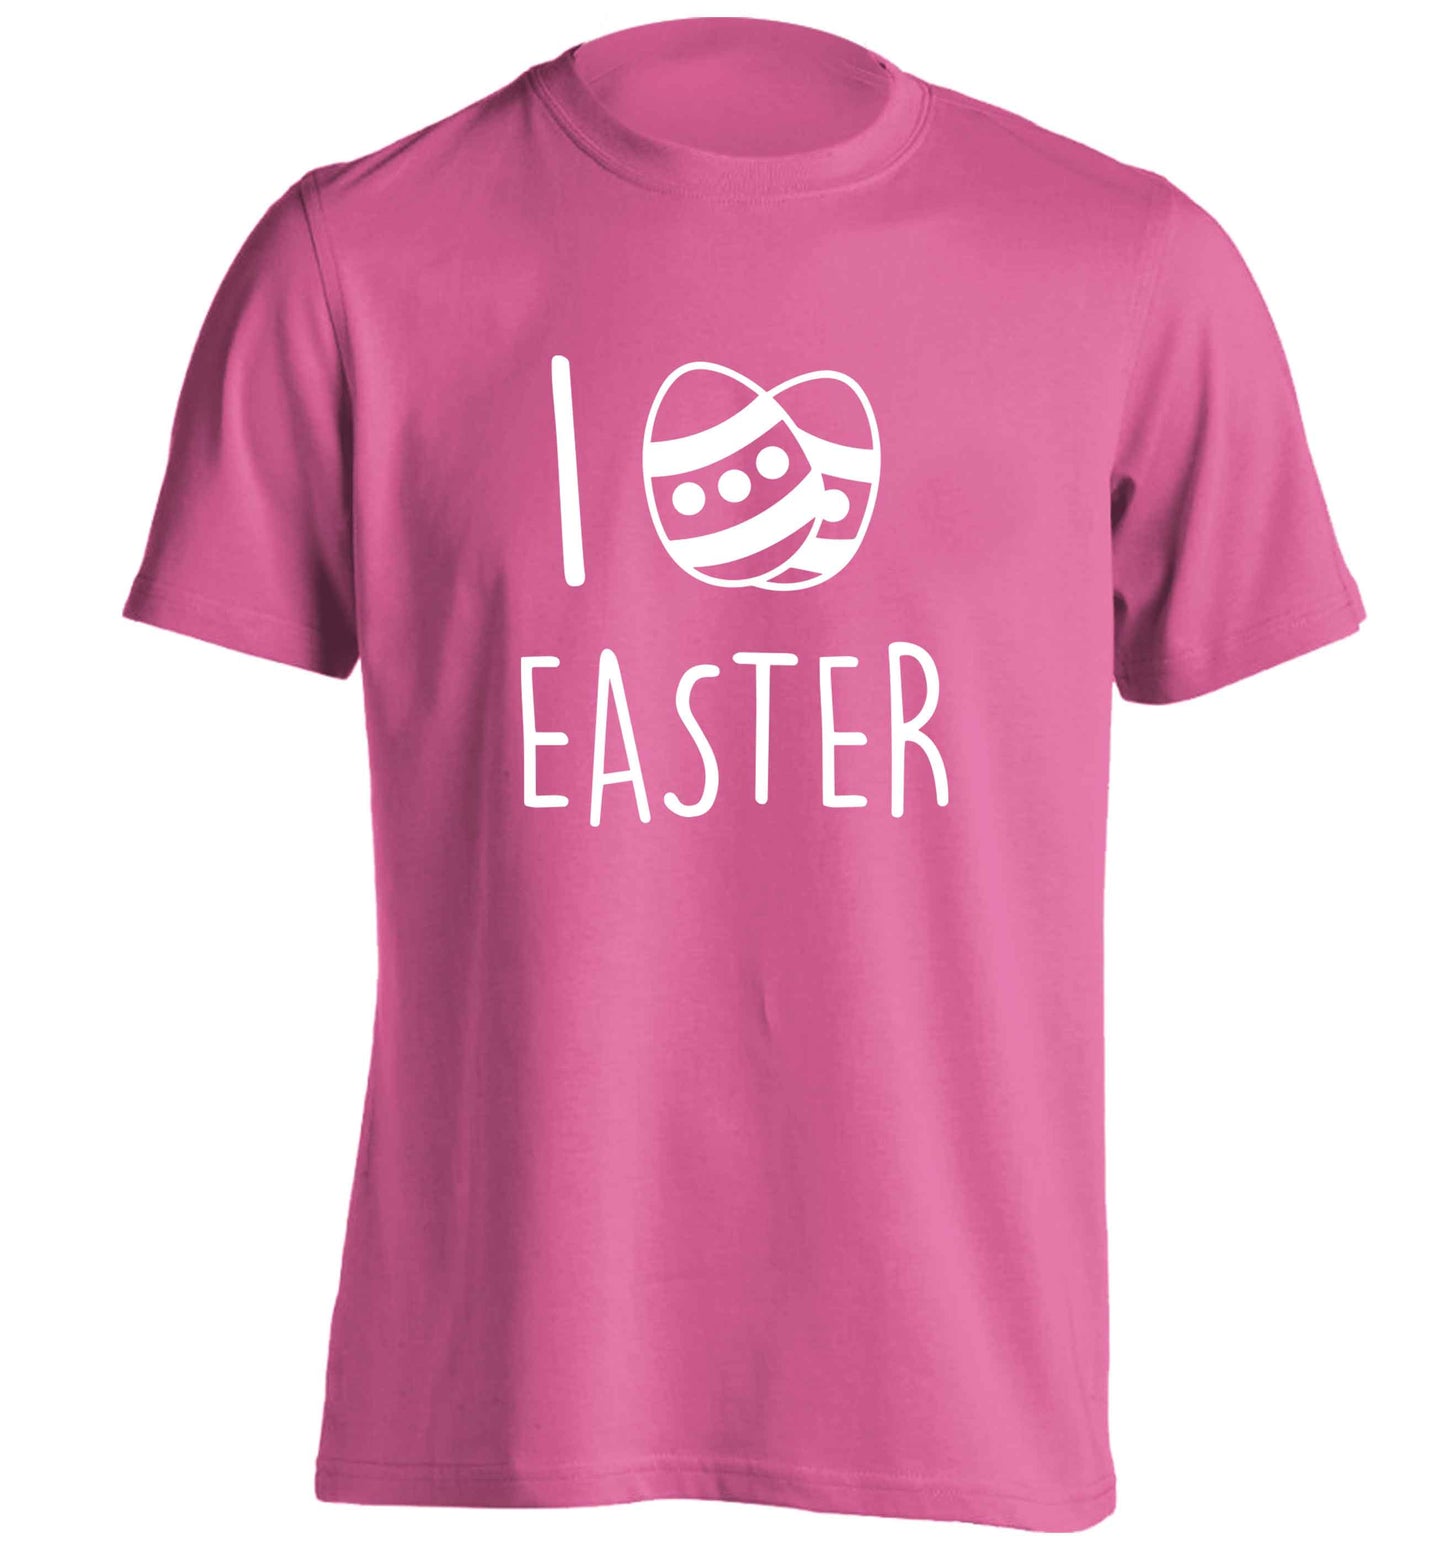 I love Easter adults unisex pink Tshirt 2XL